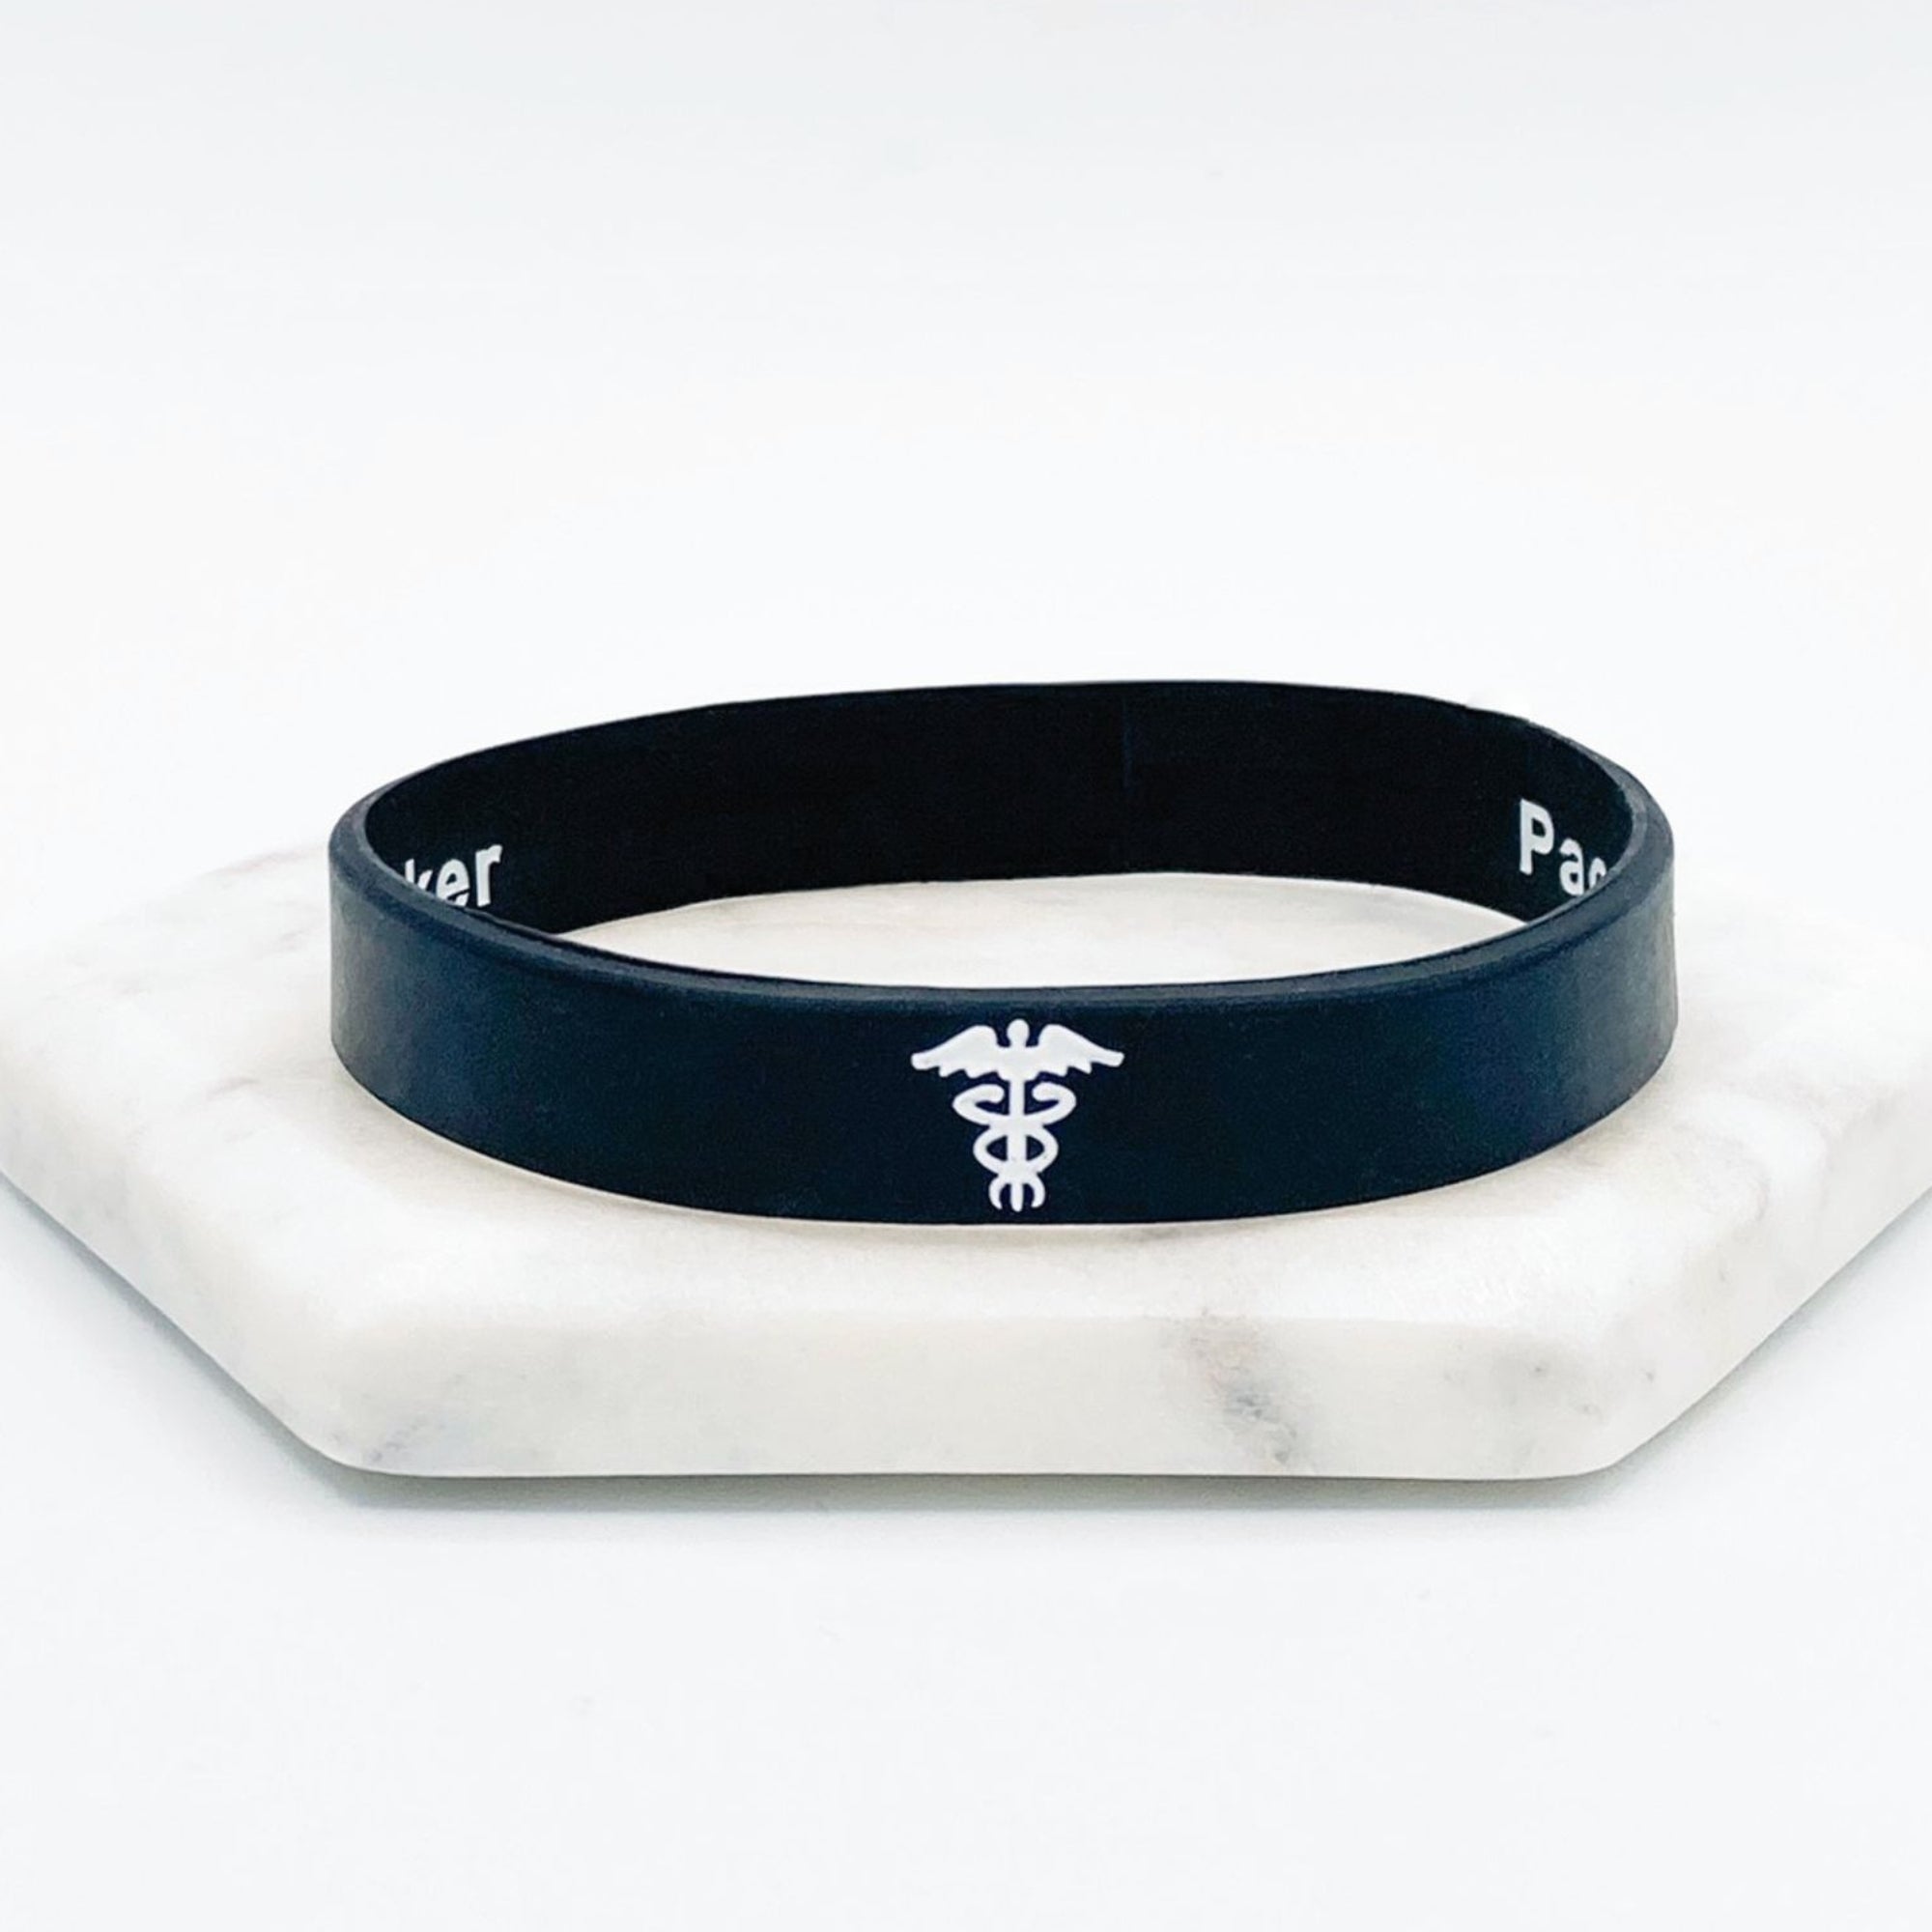 discrete wristband for pacemaker medical band